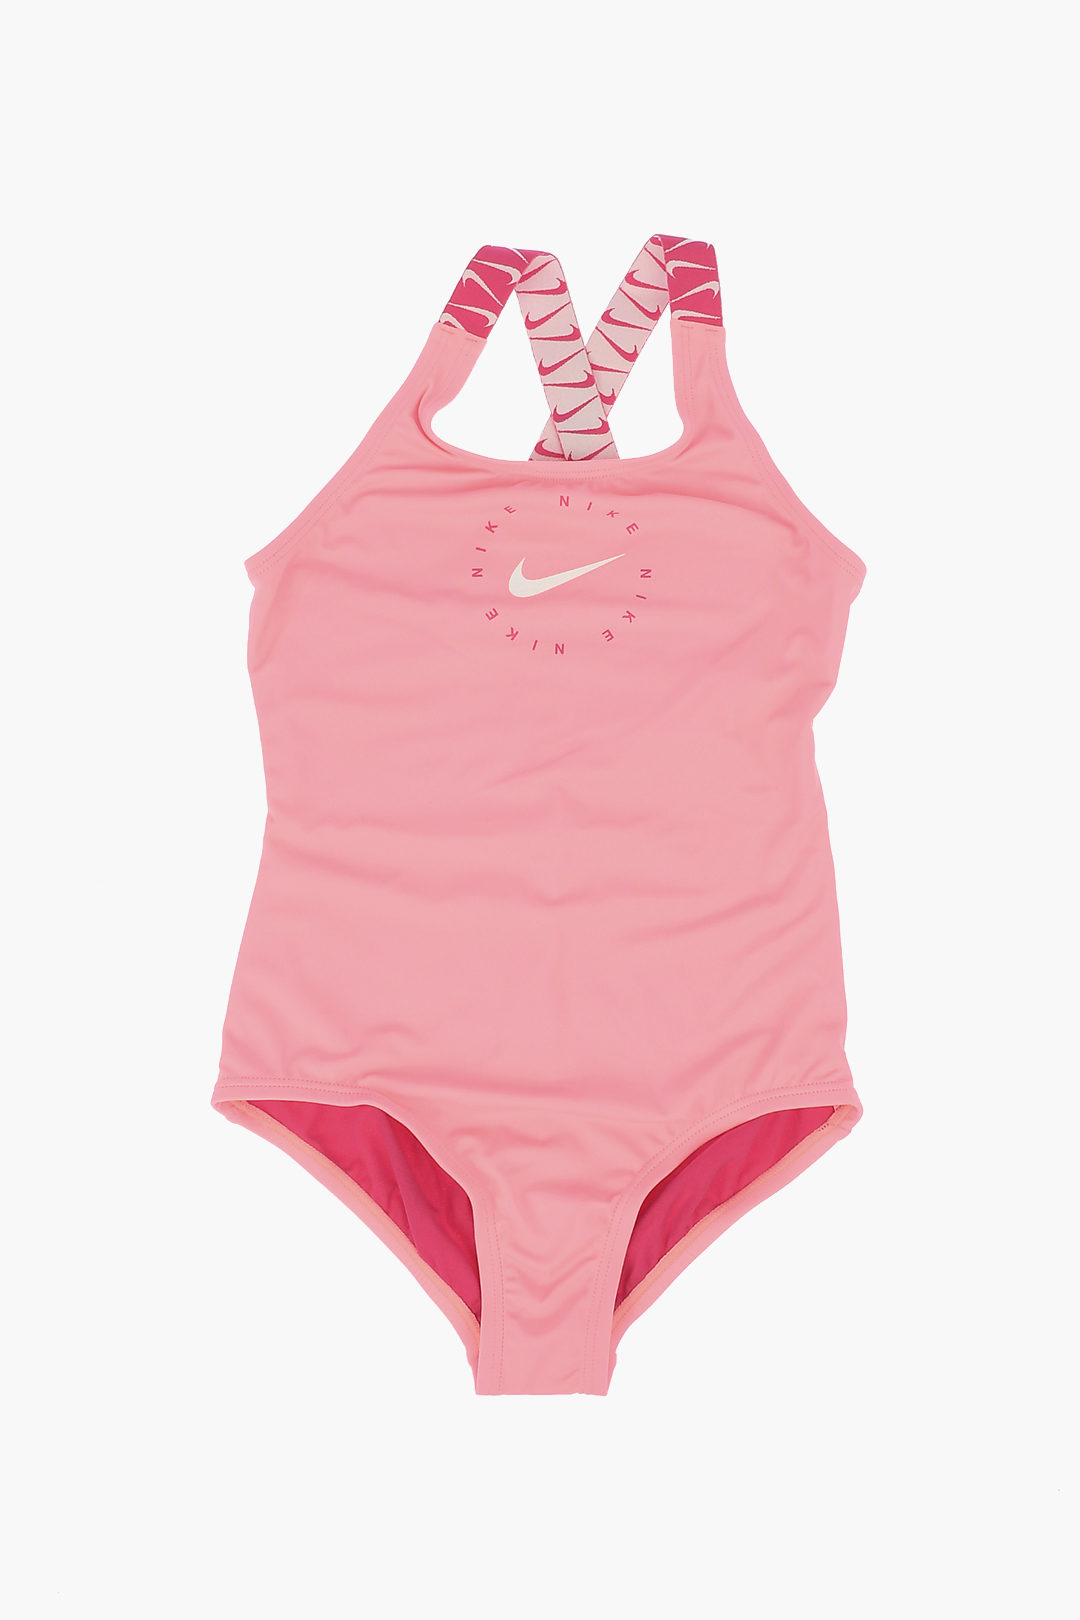 Nike One Piece Swimsuit girls - Glamood Outlet